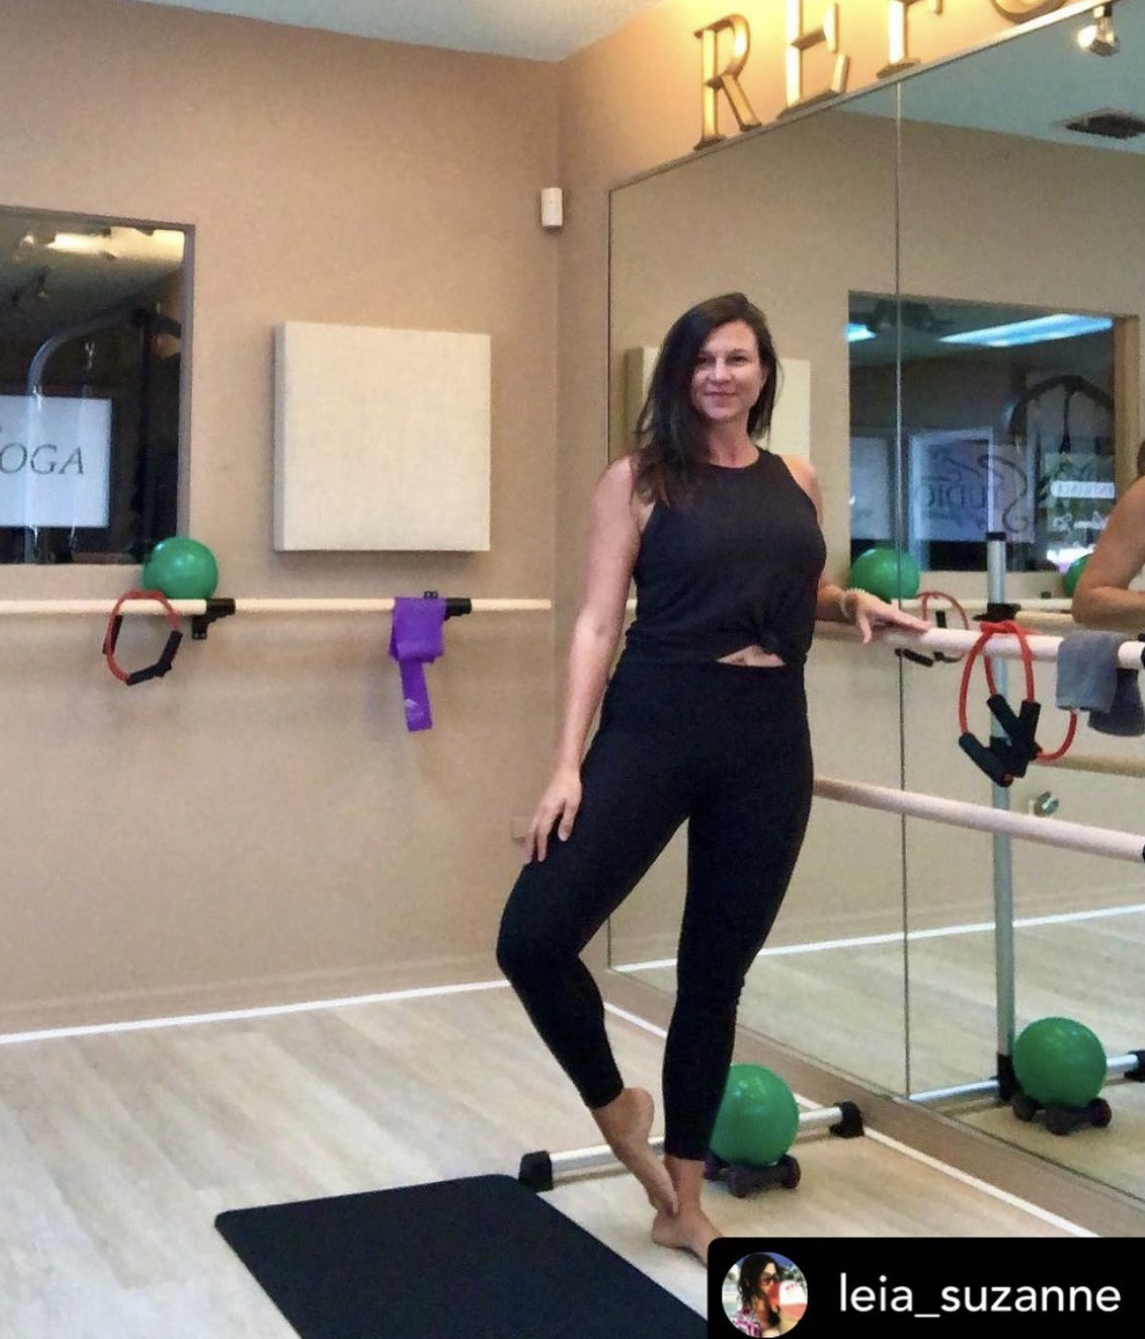 Become a Certified Barre Instructor. 100% Online barre teacher training. Earn CEC's with all major providers. 24-hour online support. Self-paced barre certification course. Finish the course today!